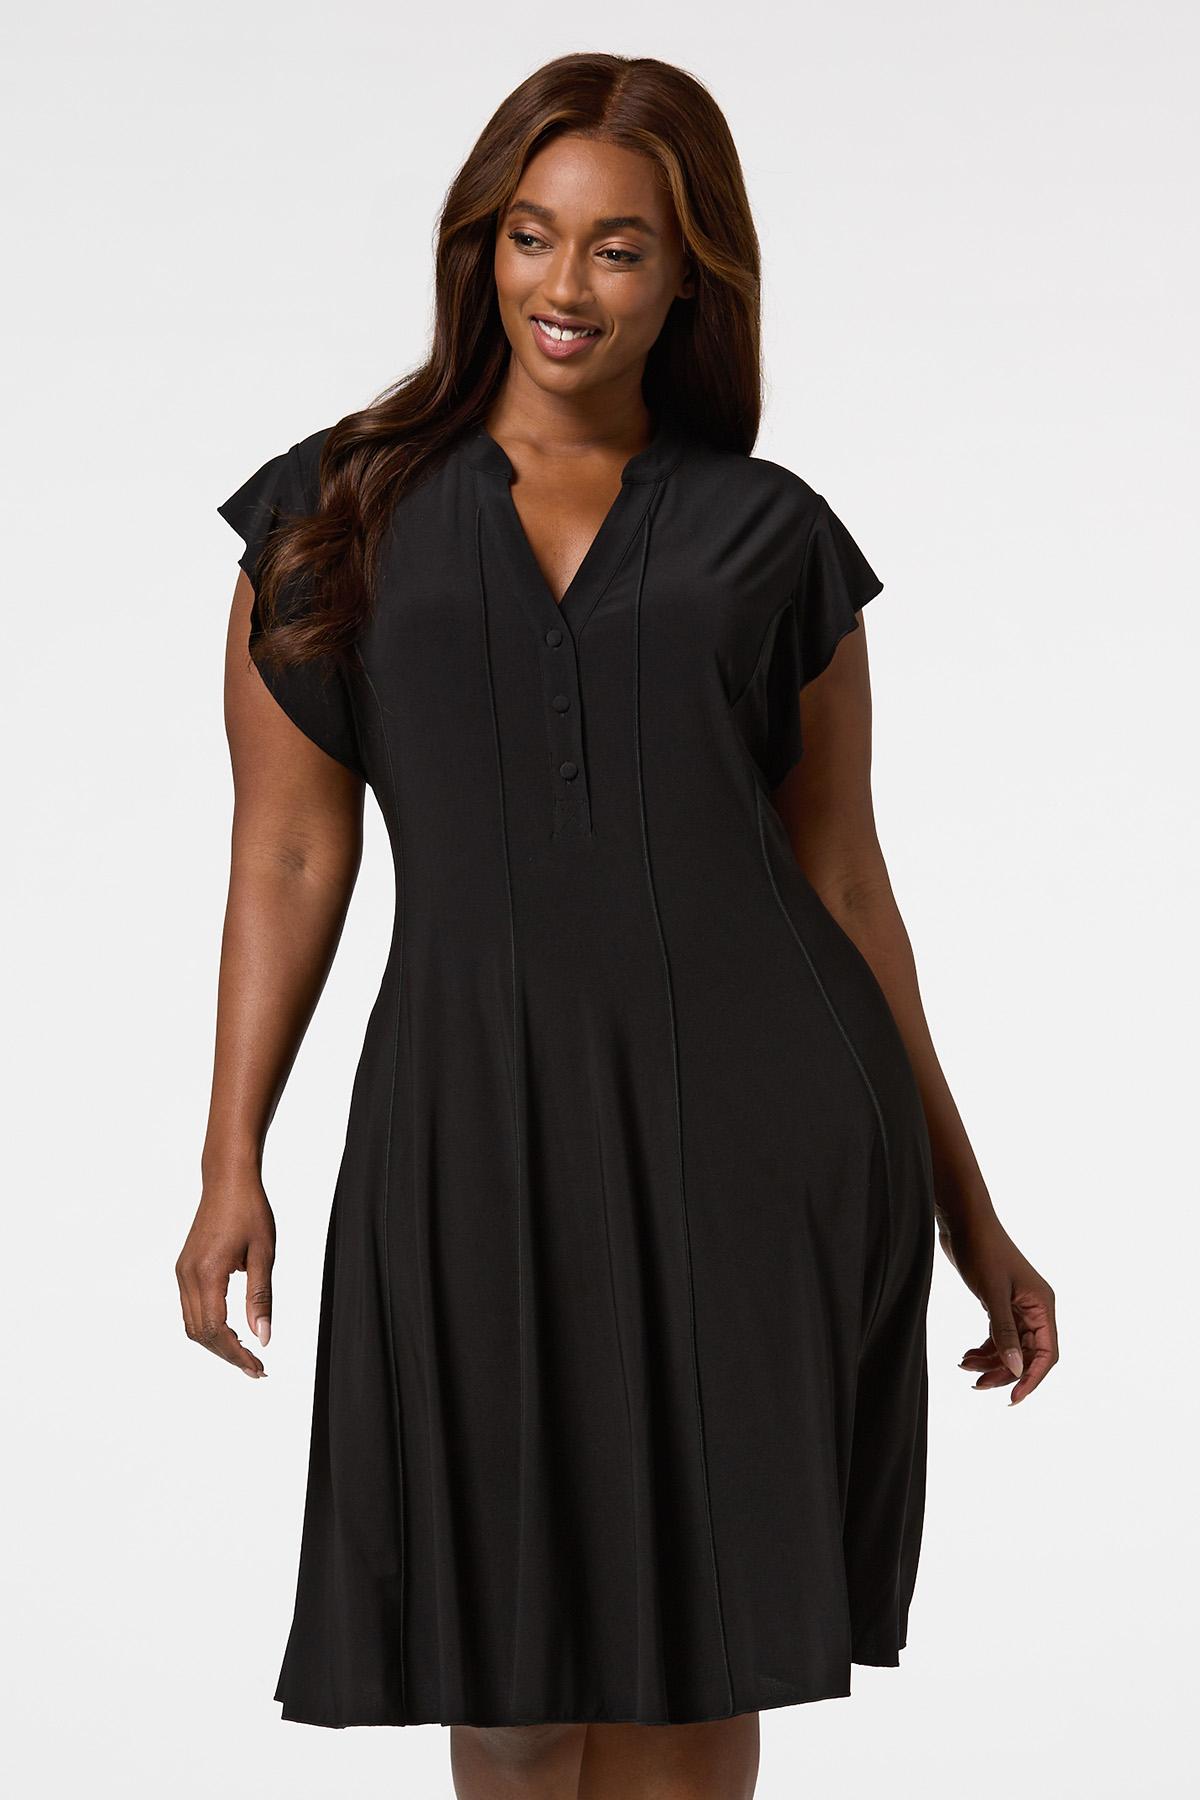 Cato Fashions  Cato Plus Size Solid Flutter Sleeve Black Dress